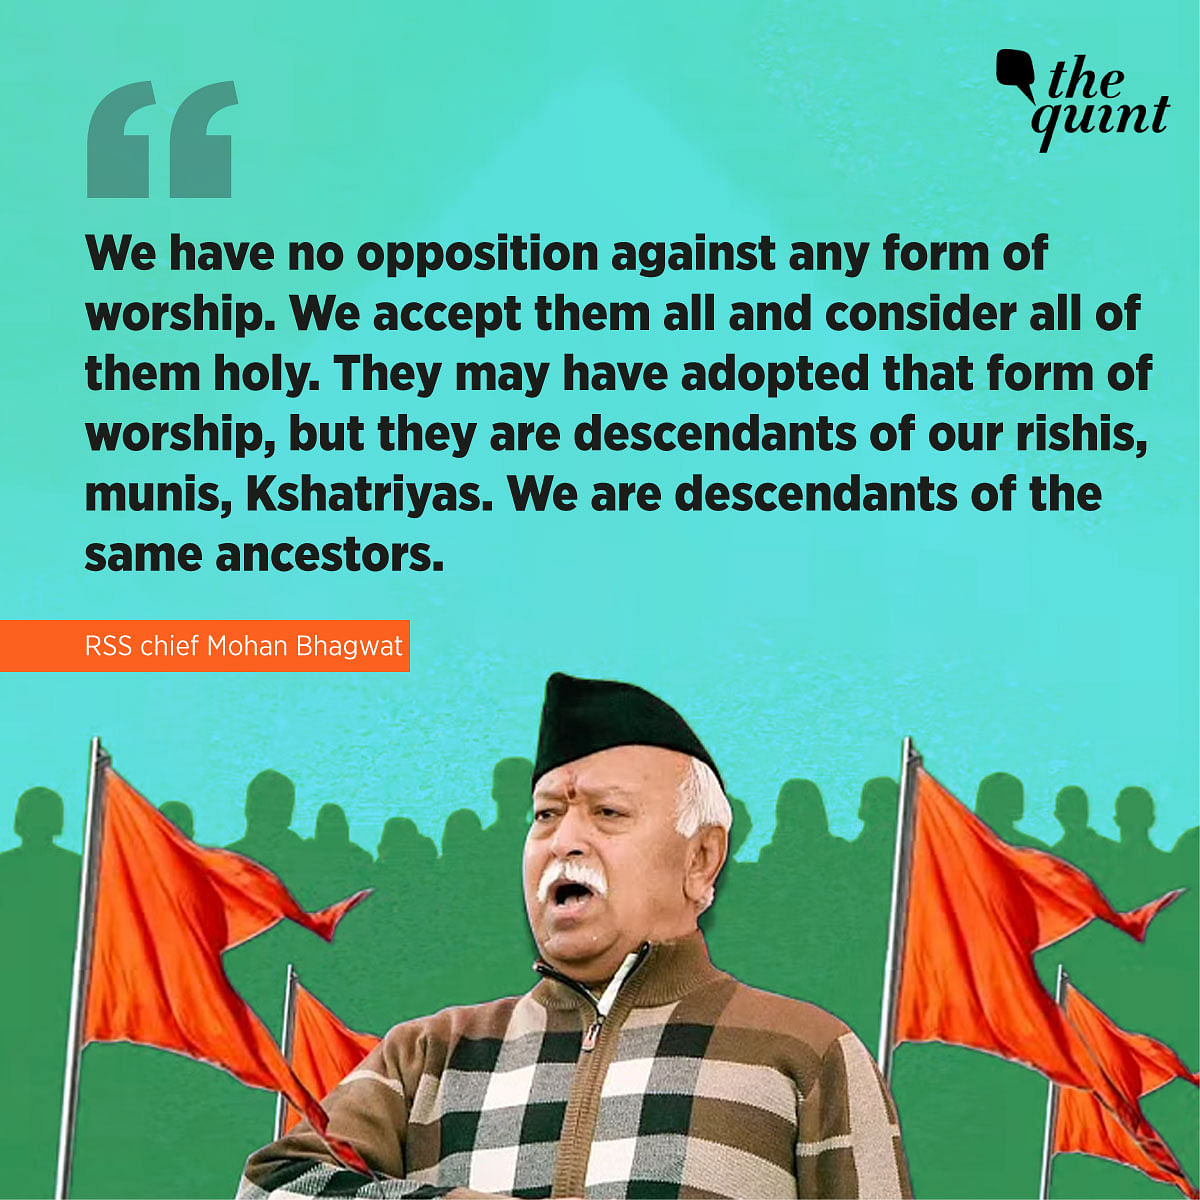 The RSS chief added that Indian Muslims were descendants of 'our rishis, munis, and Kshatriyas'.